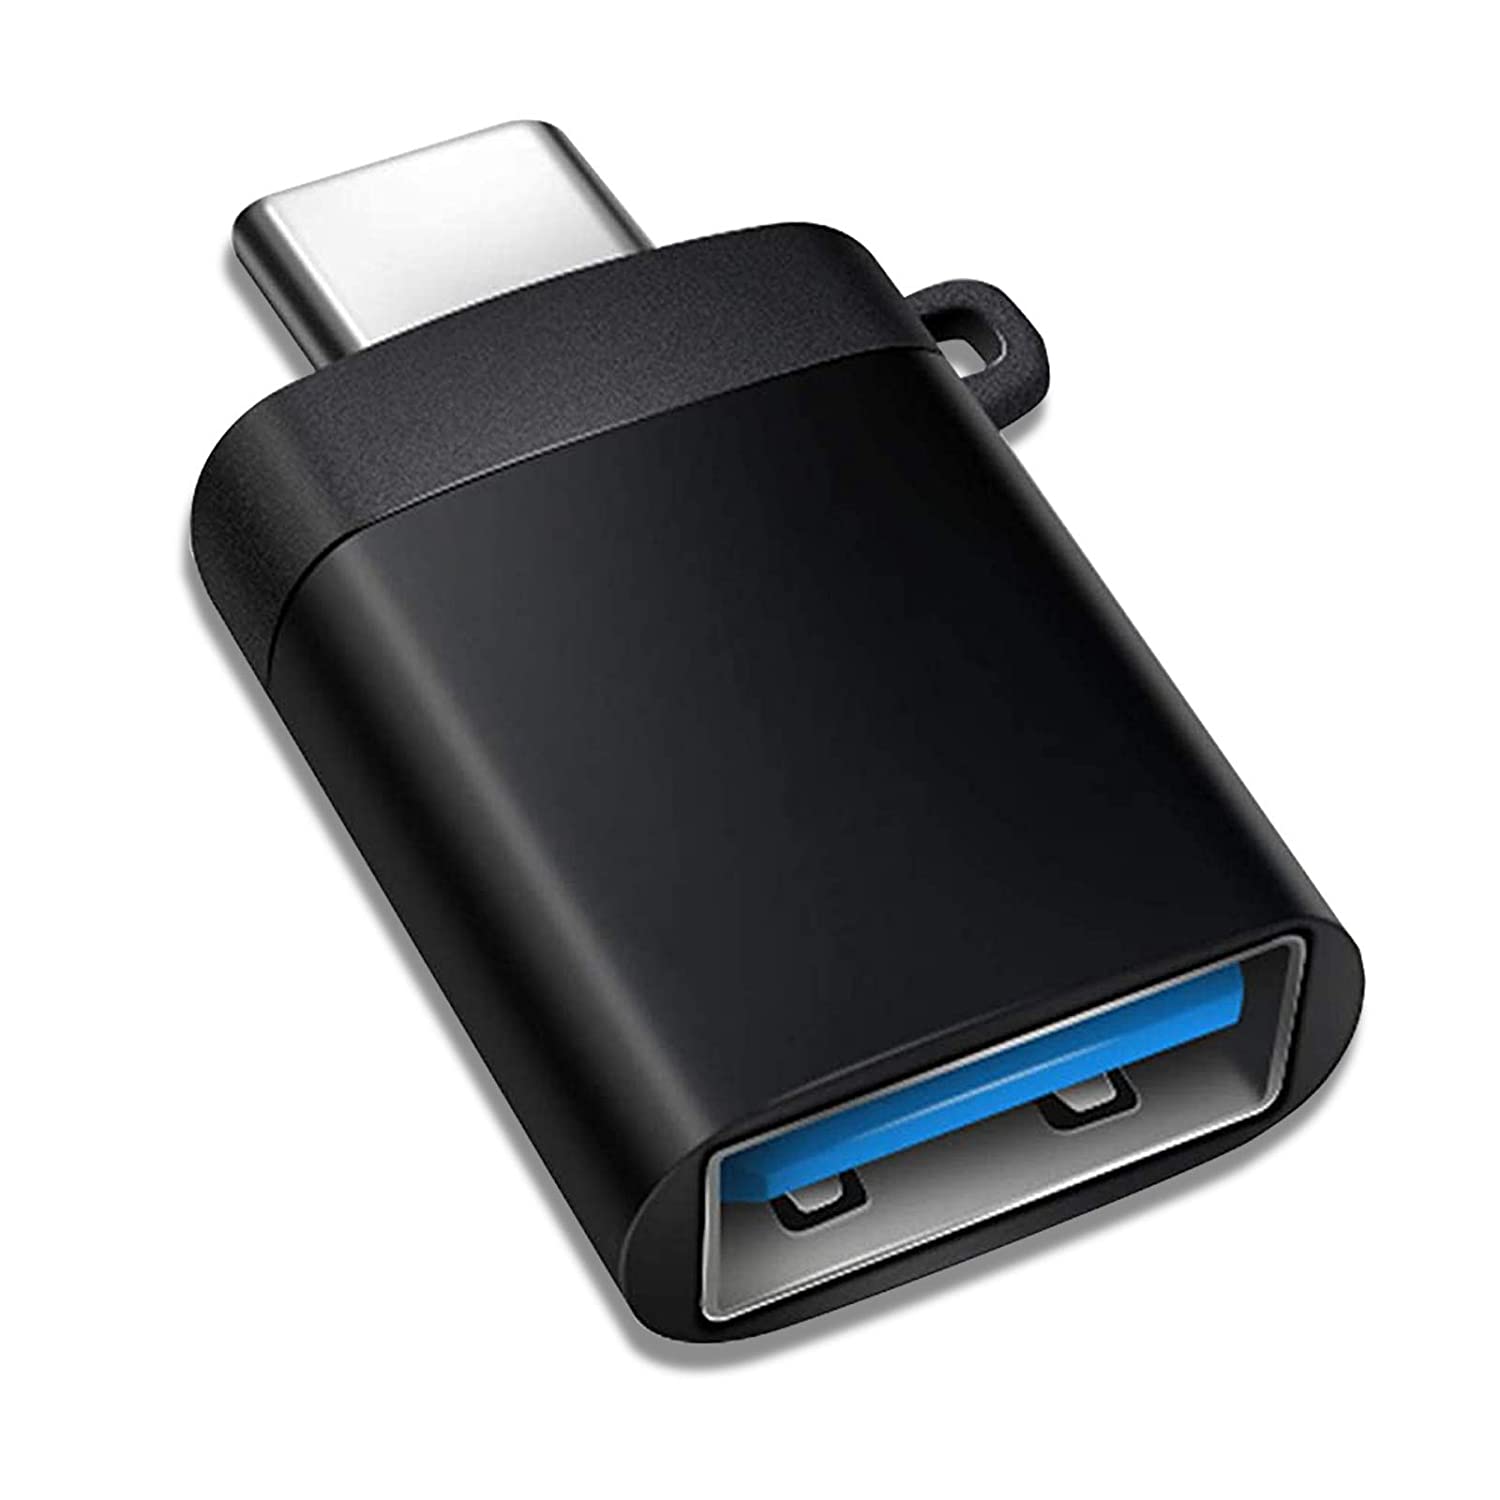 A black USB-C to USB-A adapter